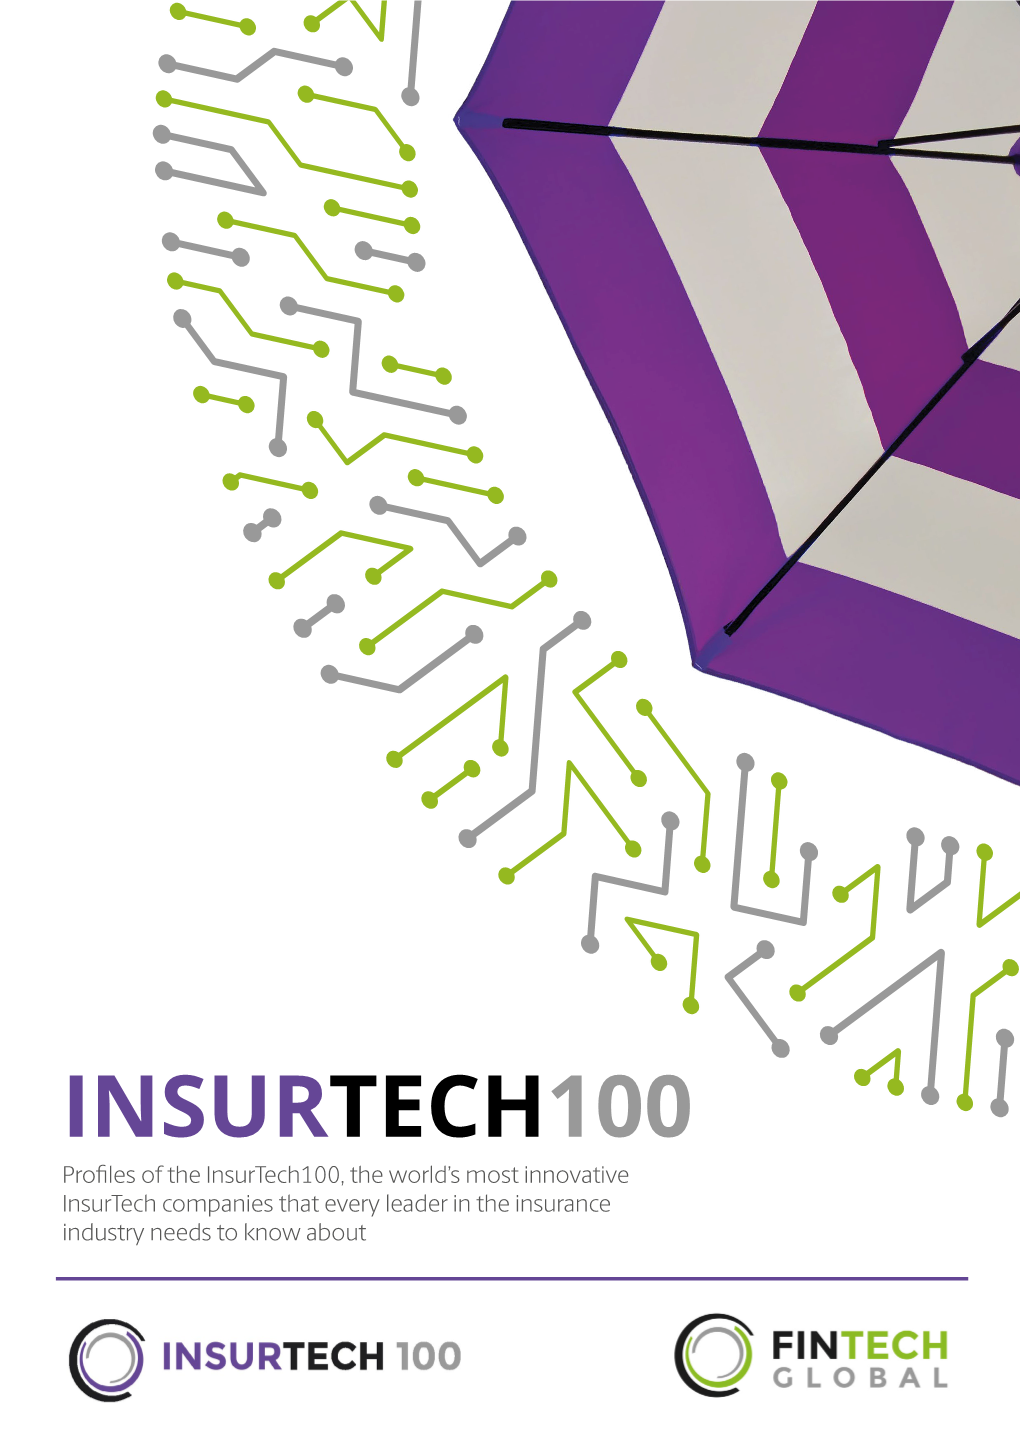 INSURTECH100 Profiles of the Insurtech100, the World’S Most Innovative Insurtech Companies That Every Leader in the Insurance Industry Needs to Know About